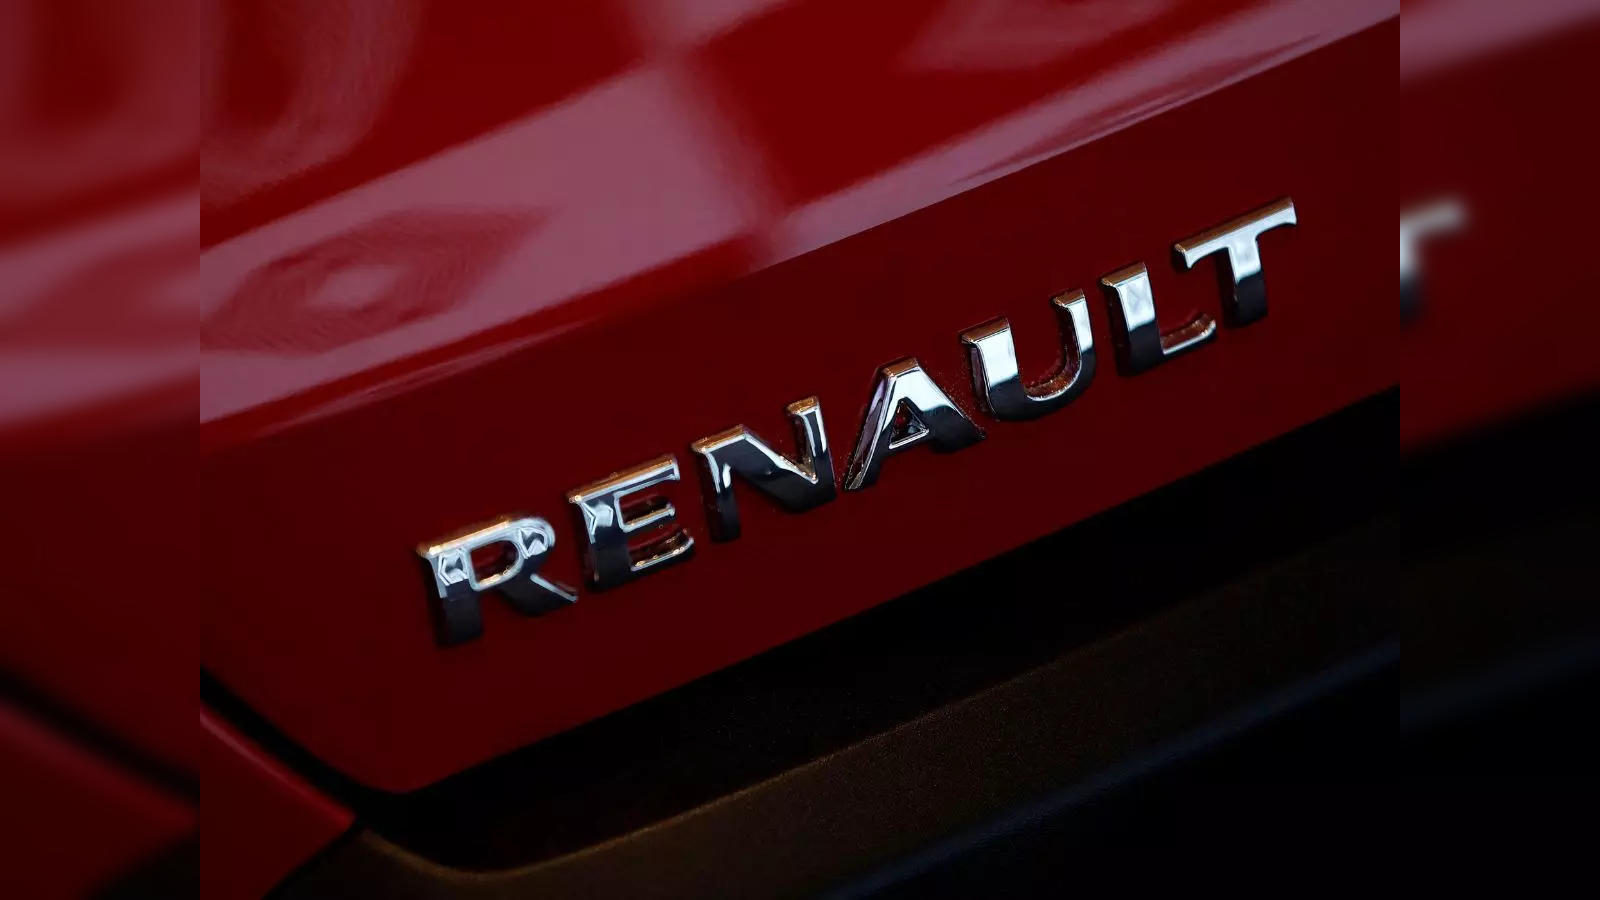 renault-is-going-to-launch-a-new-model-of-new-generation-suv-car-in-the-market-renault-nissan-renault-duster